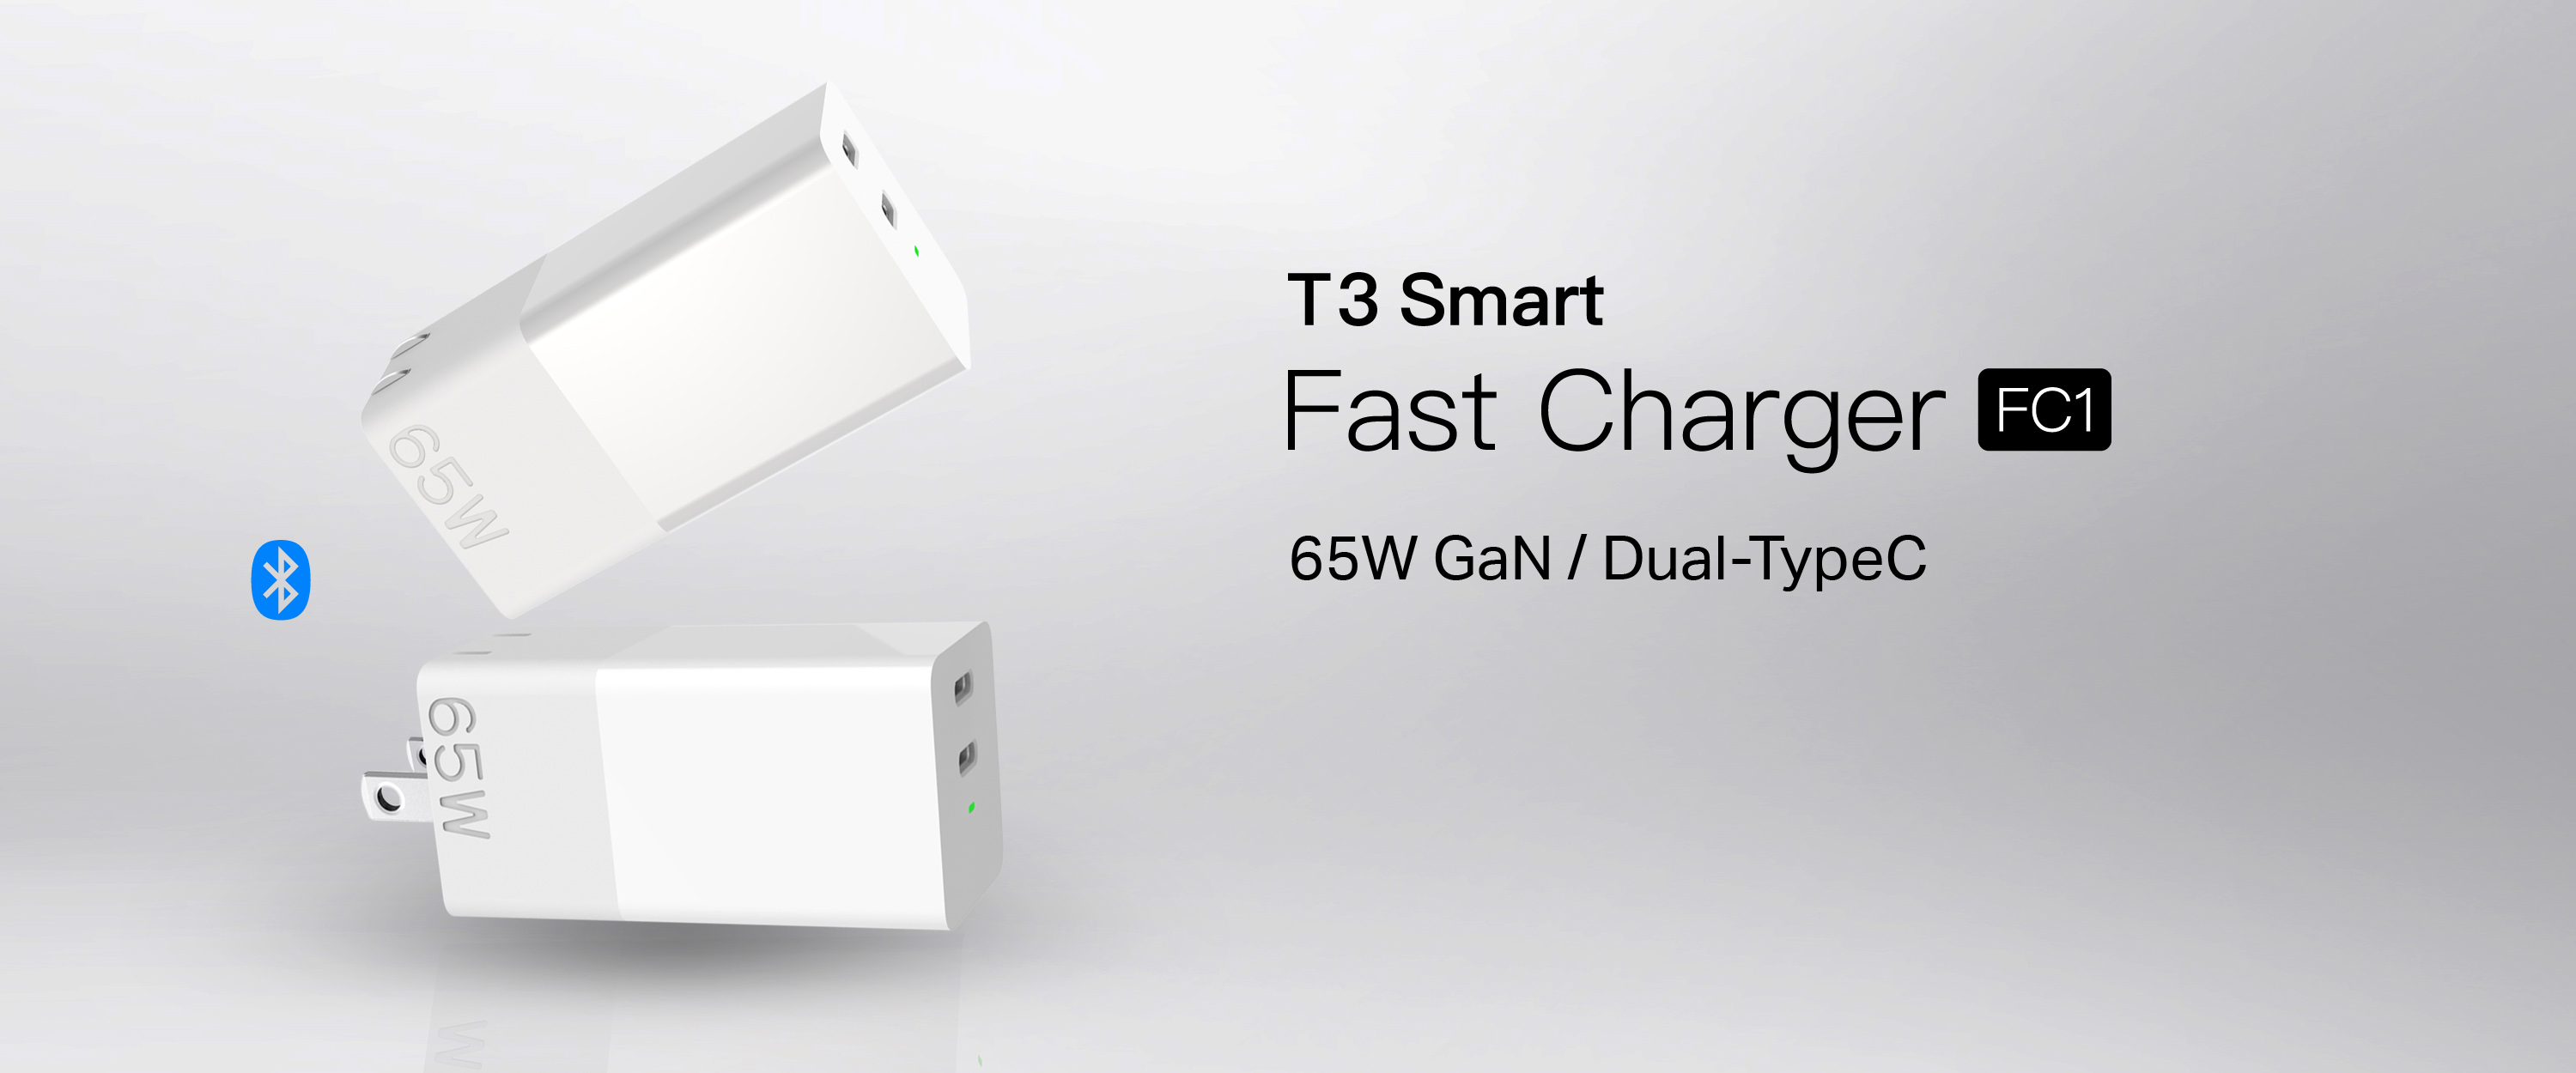 T3 Smart Fast Charger FC1